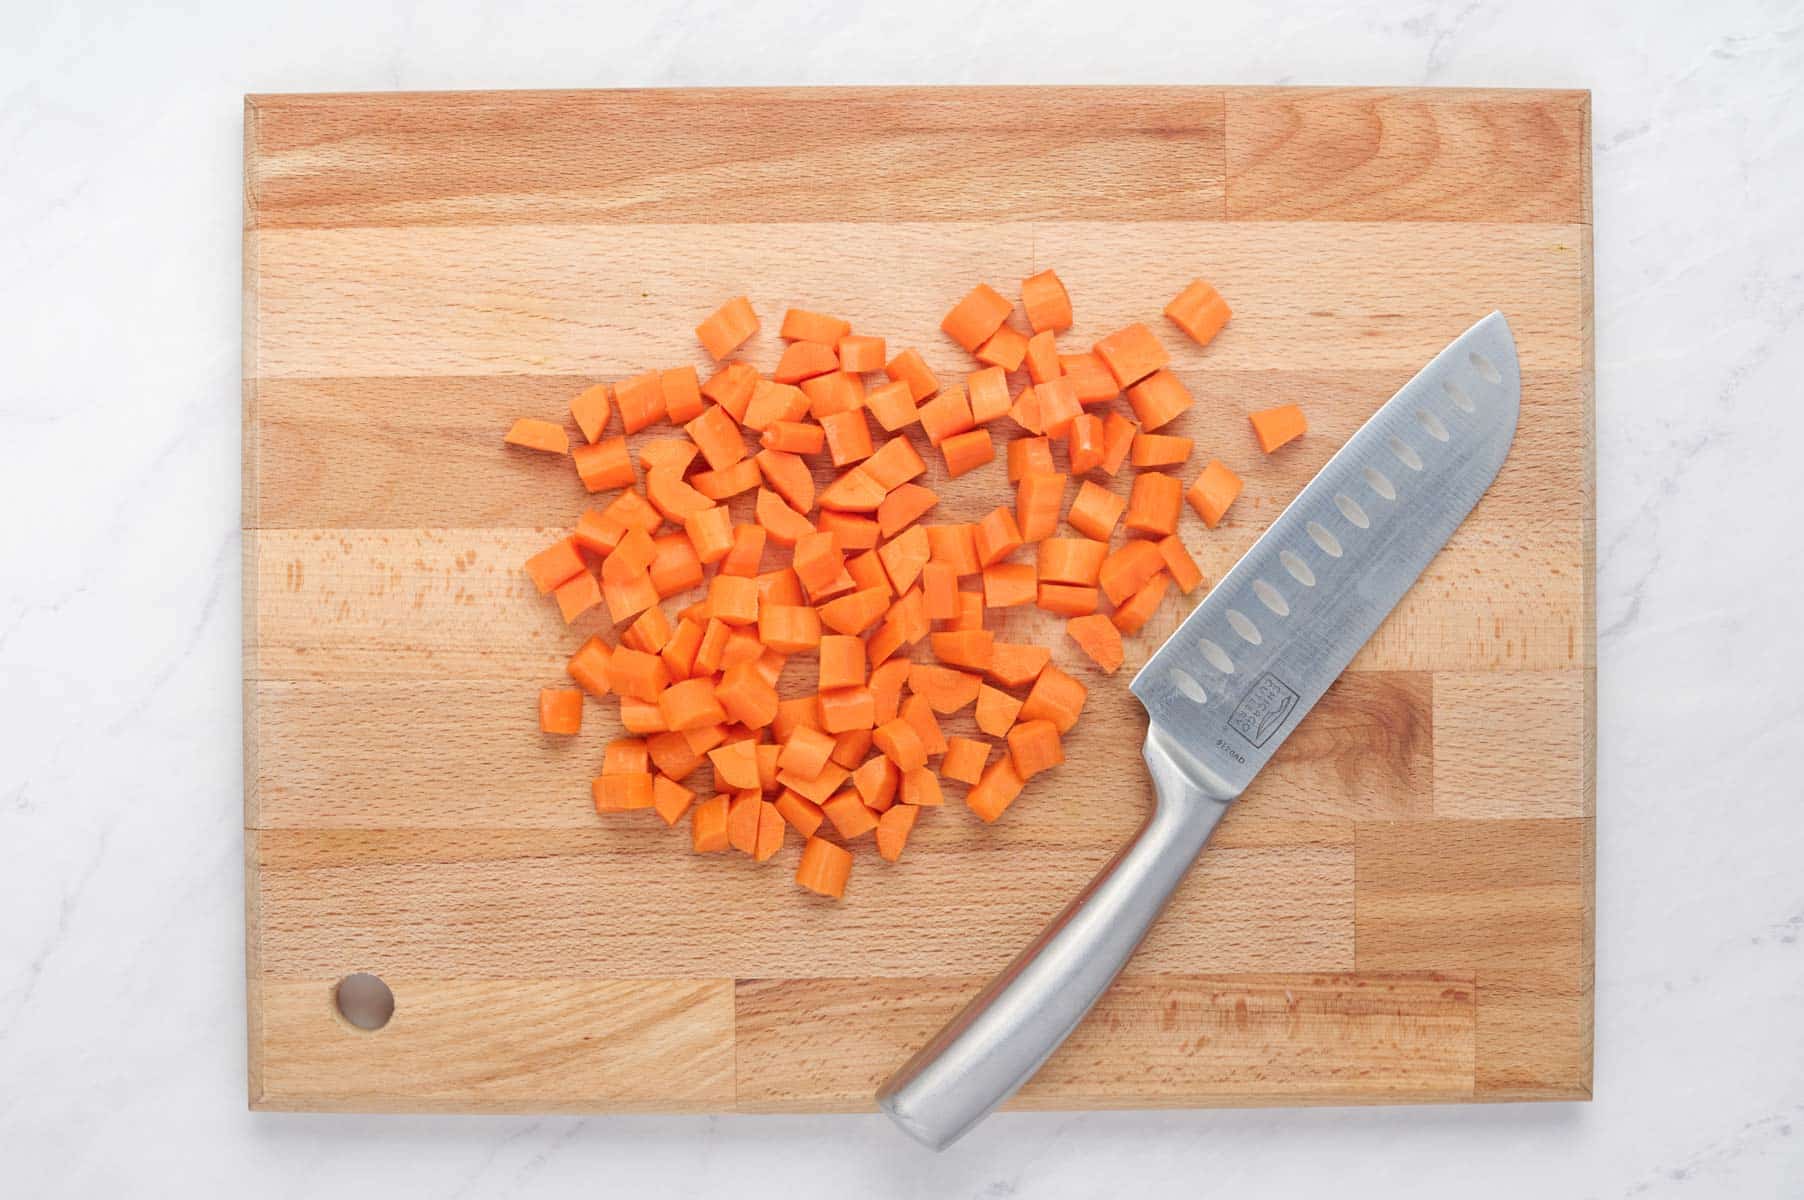 Carrots are chopped on a cutting board.